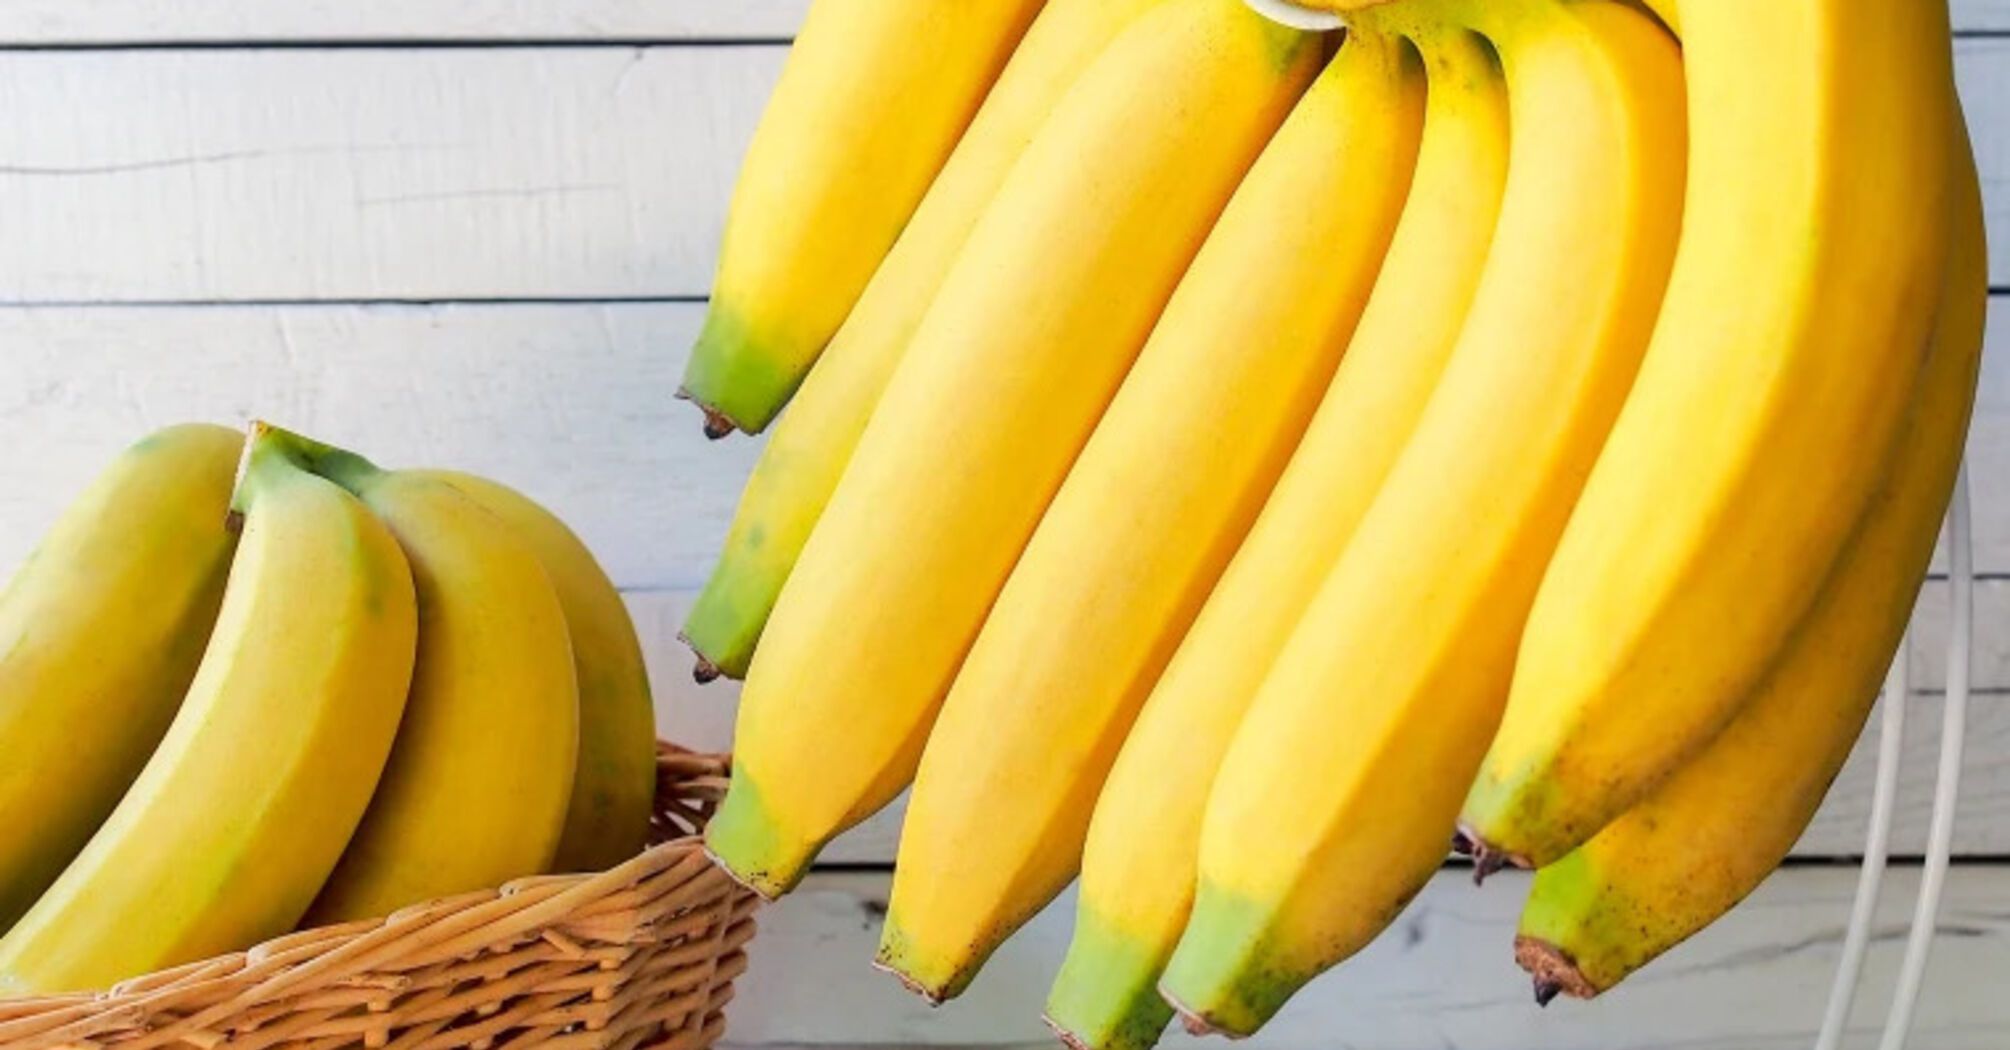 How to store bananas properly